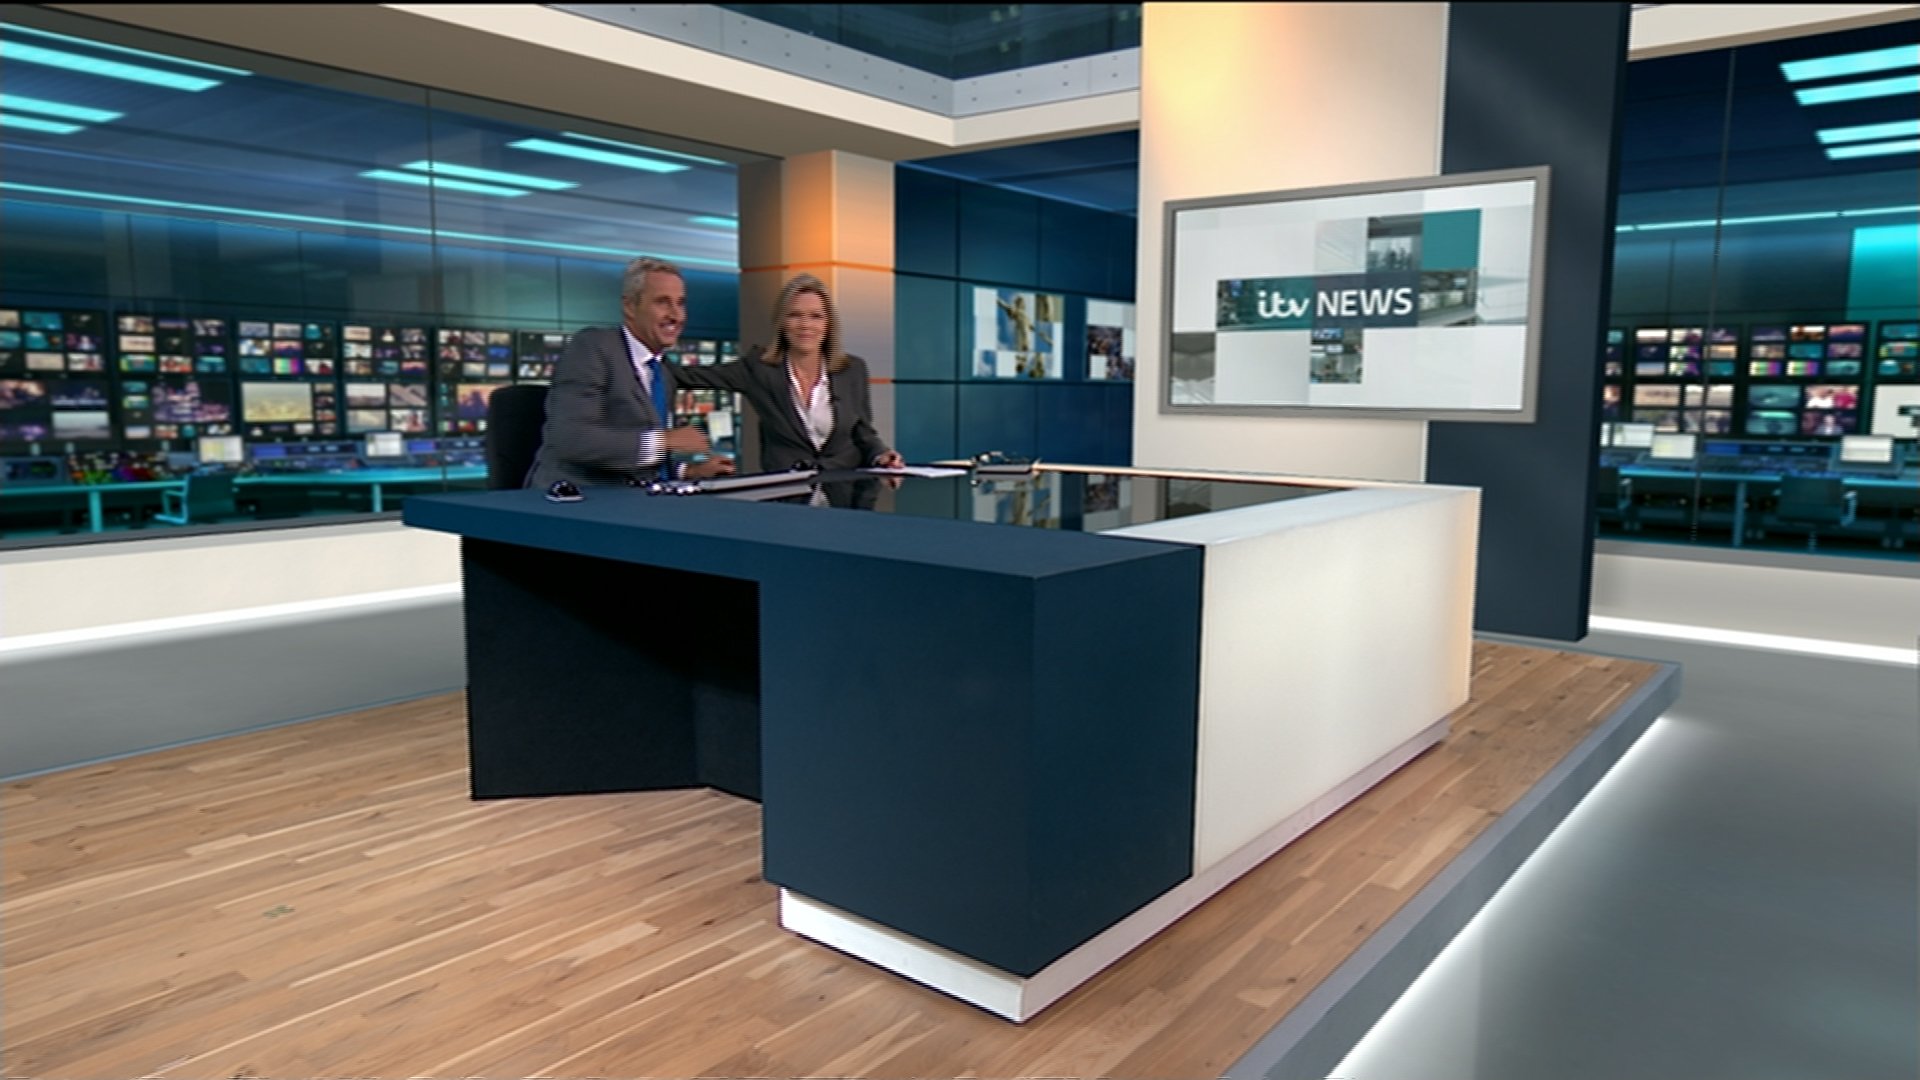 Itv News On Twitter Mark Austin Says Farewell To Itv News After